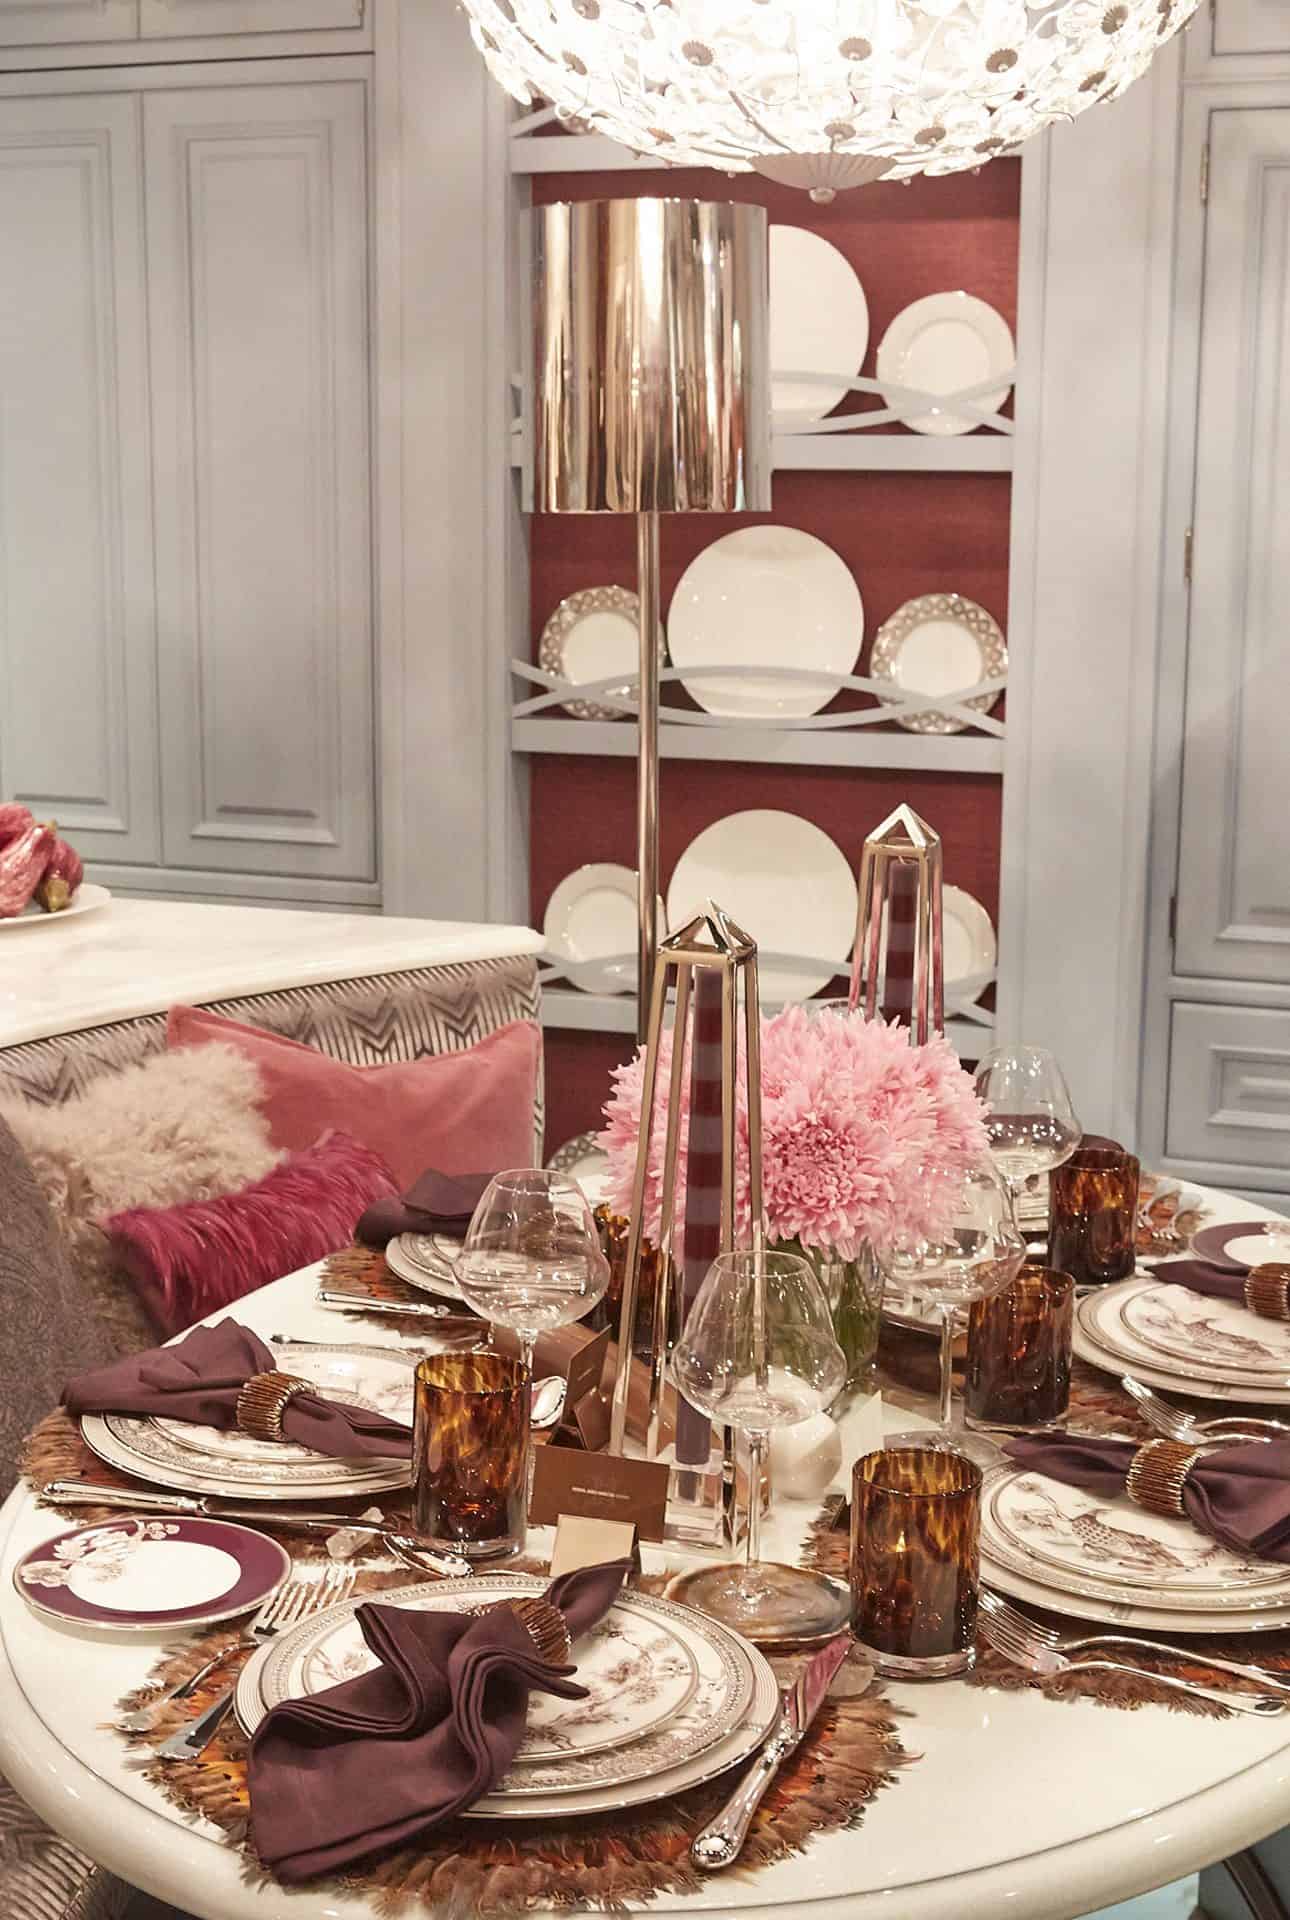 Tabletop design using pinks, and wine tones with Fine Bone China and silverware place settings.